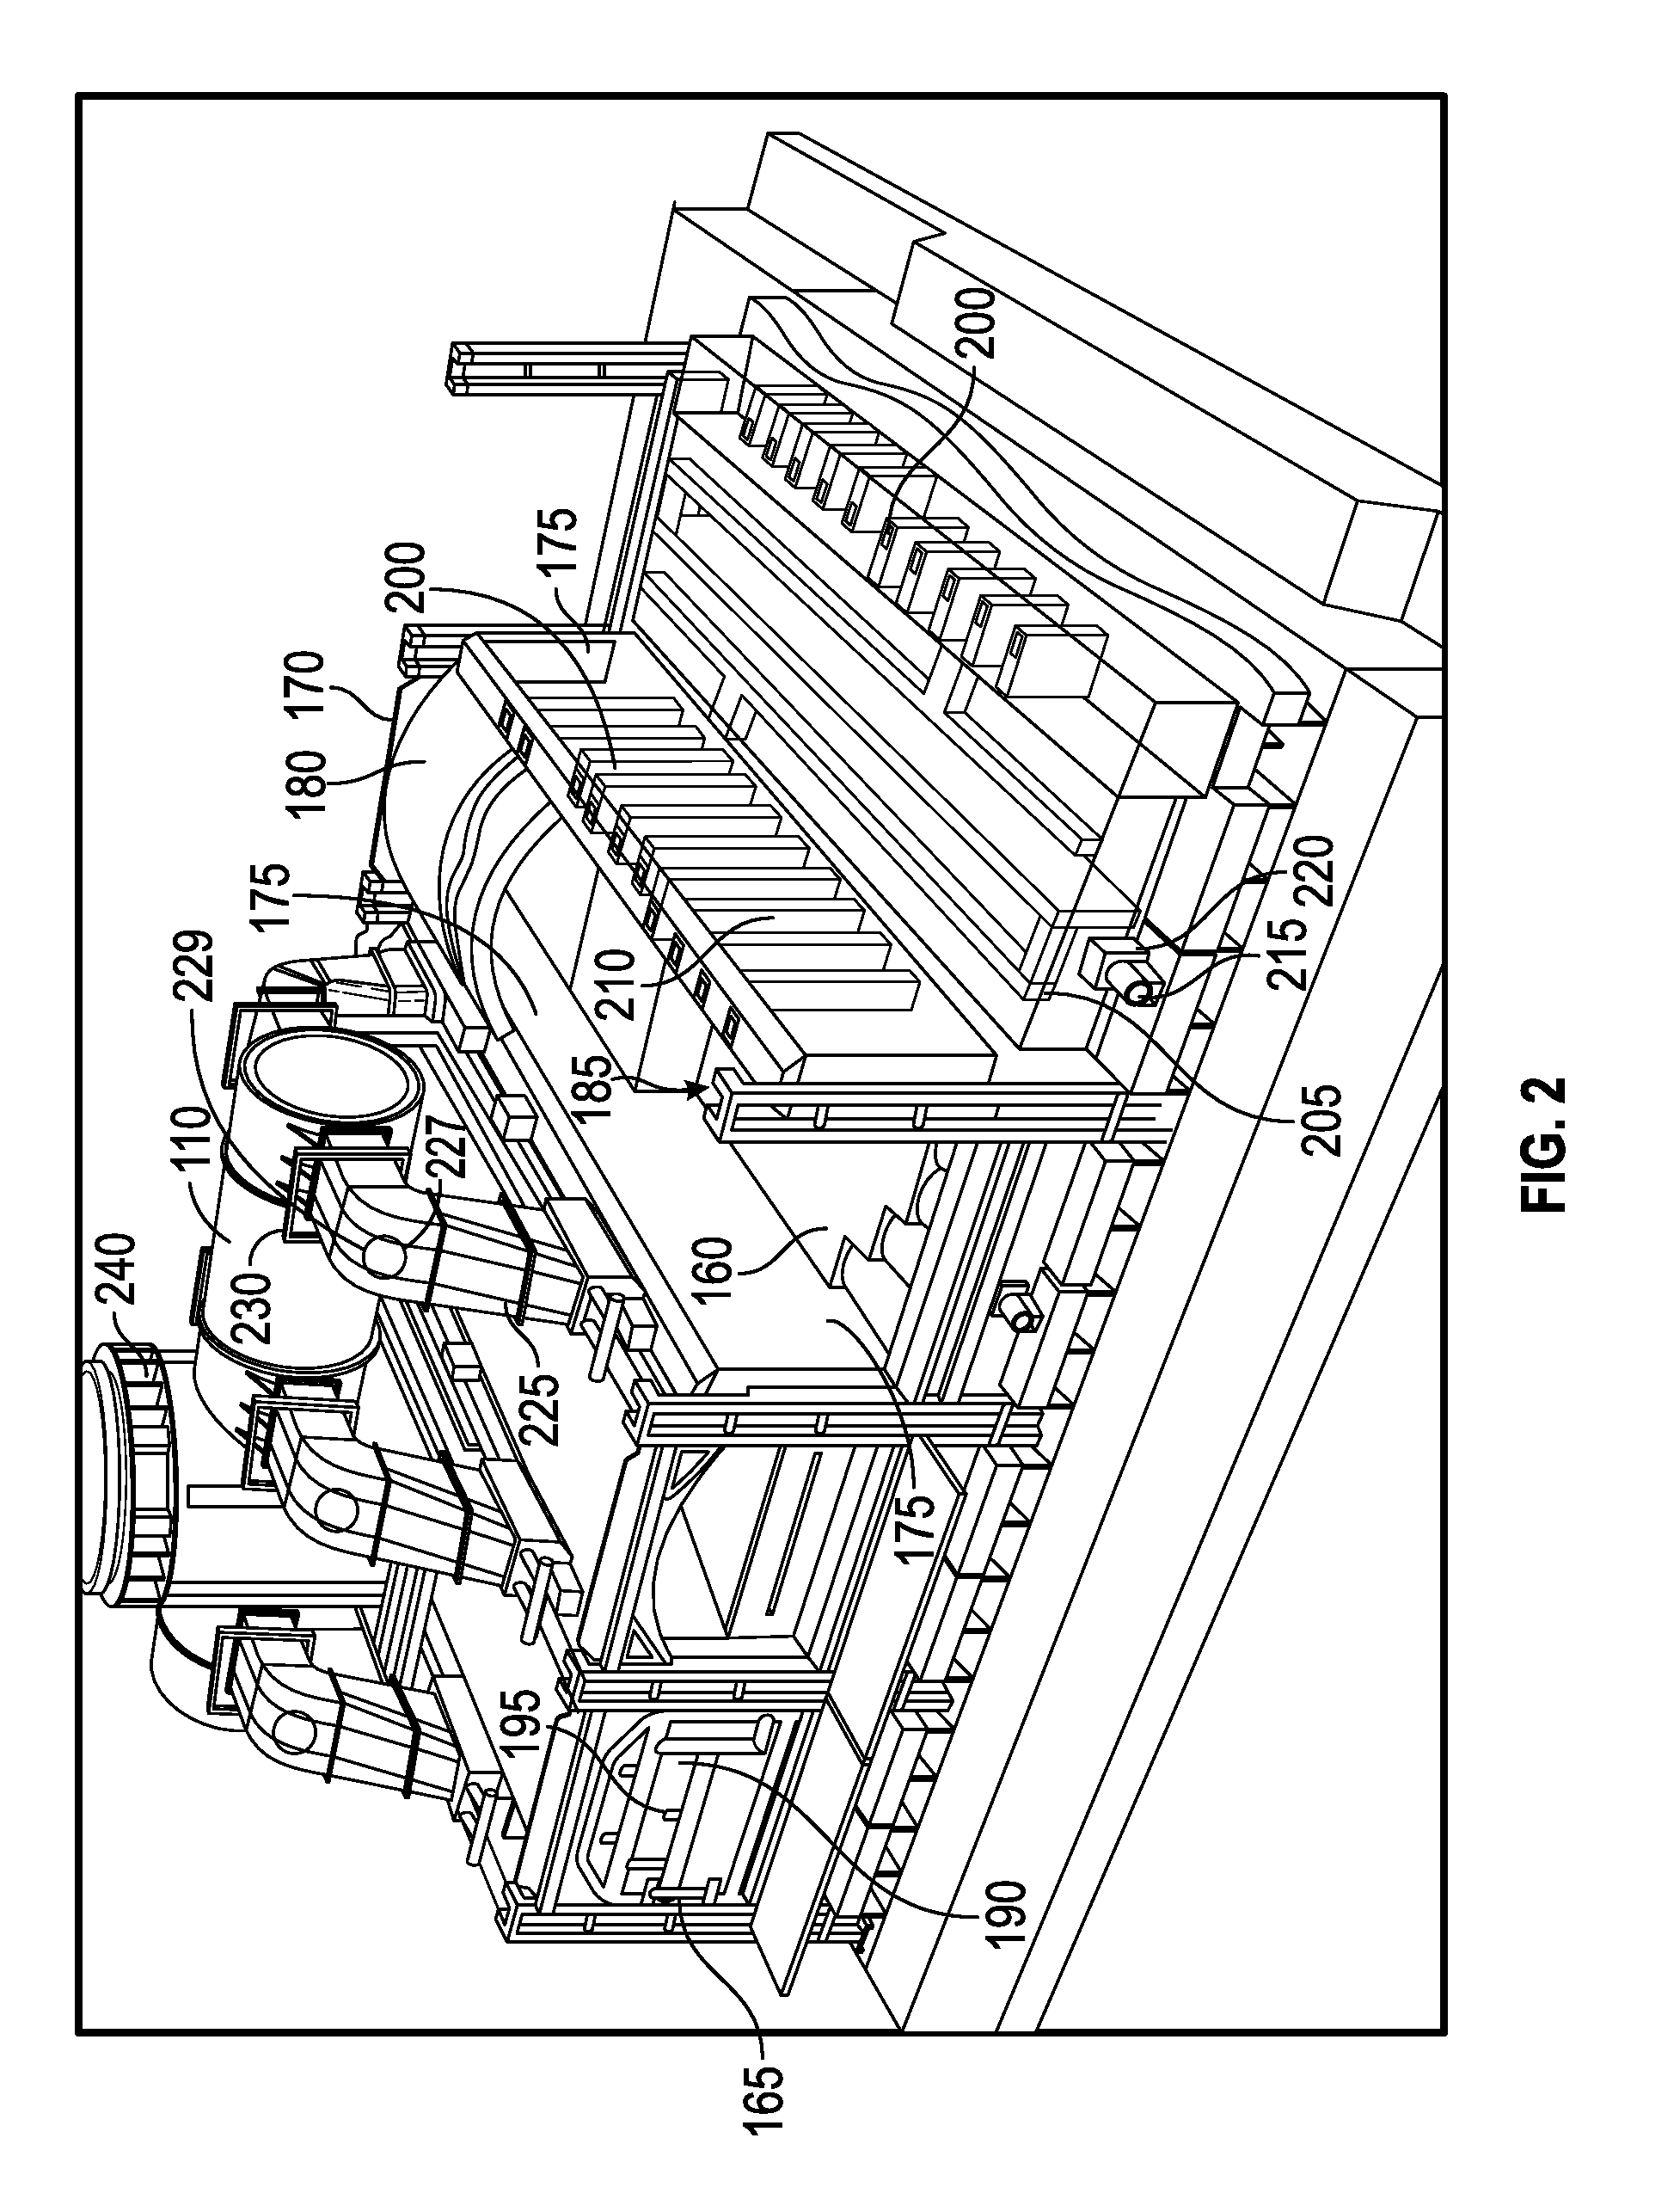 Automatic draft control system for coke plants